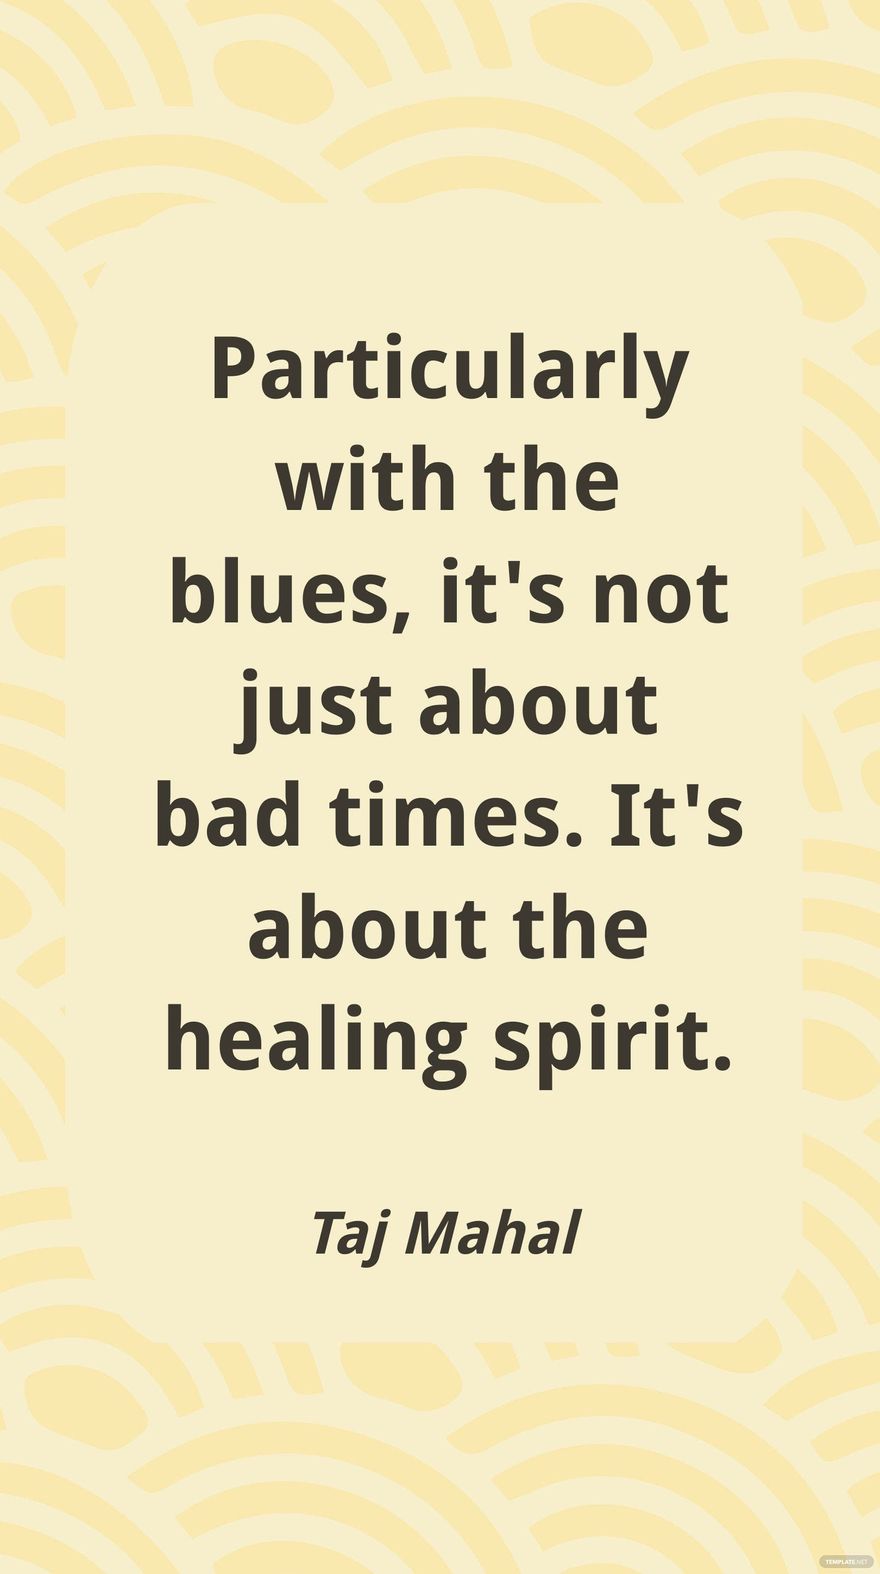 Taj Mahal - Particularly with the blues, it's not just about bad times. It's about the healing spirit.